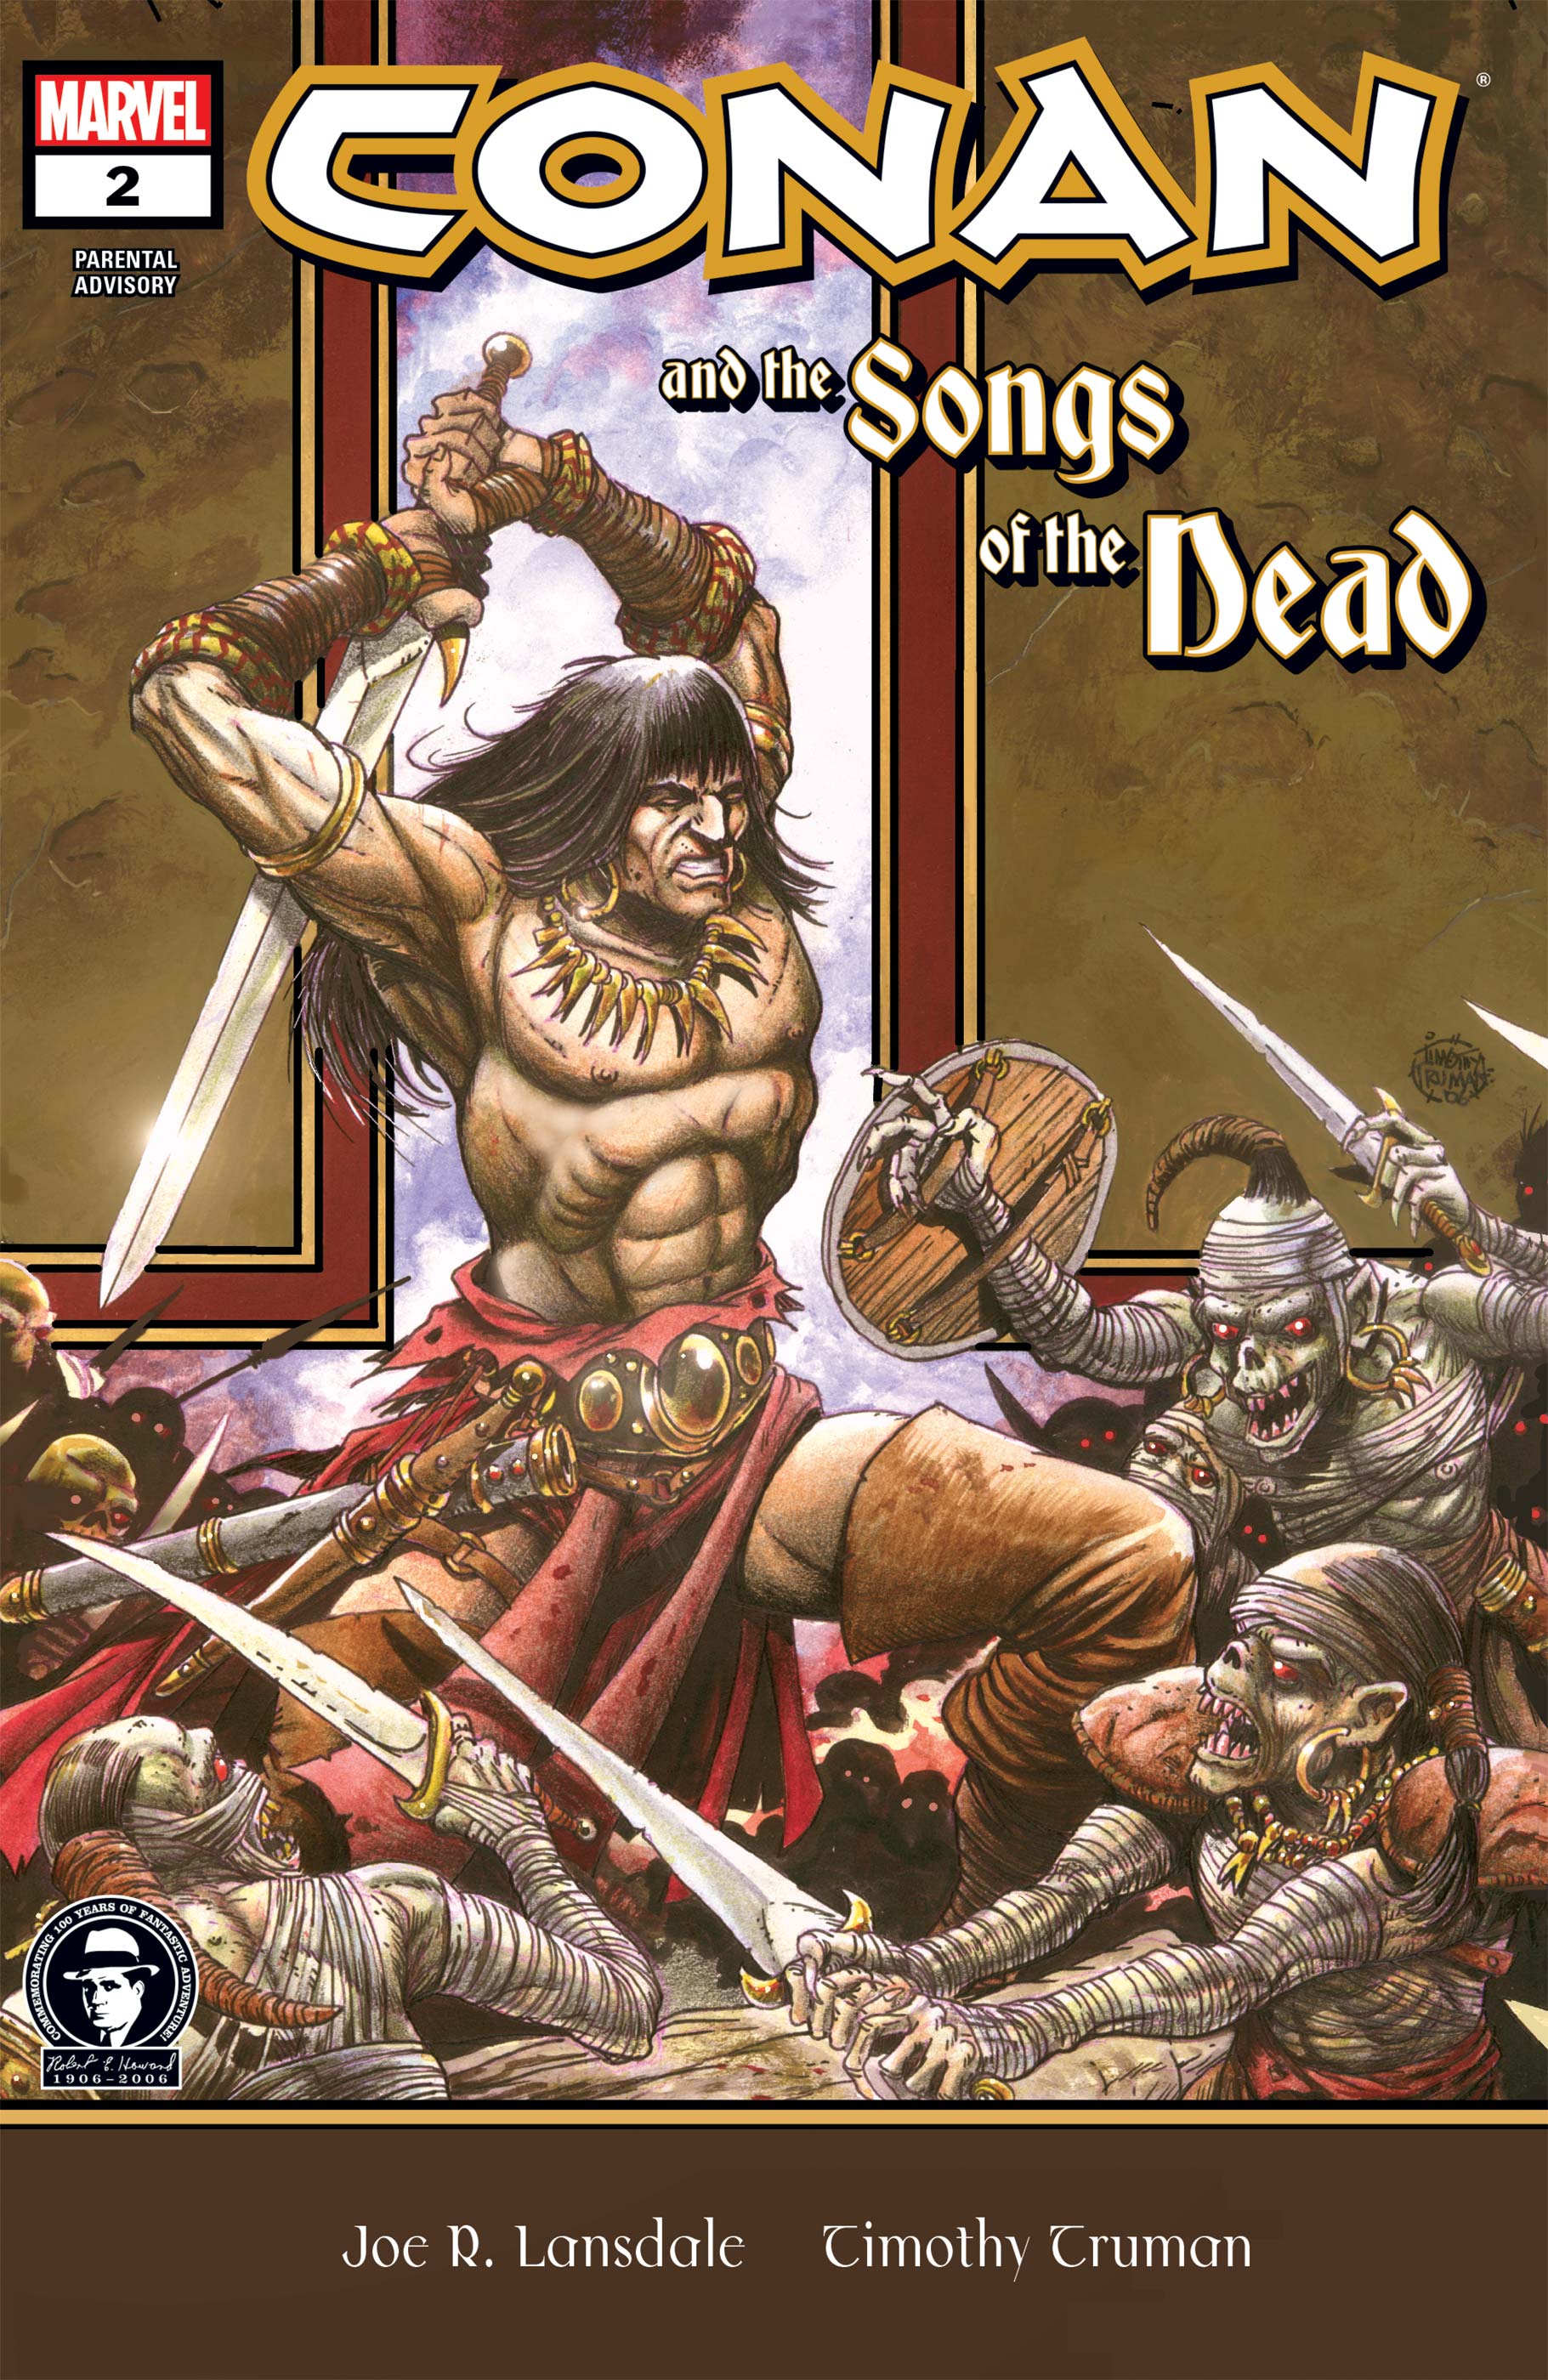 Conan and the Songs of the Dead (2006) #2